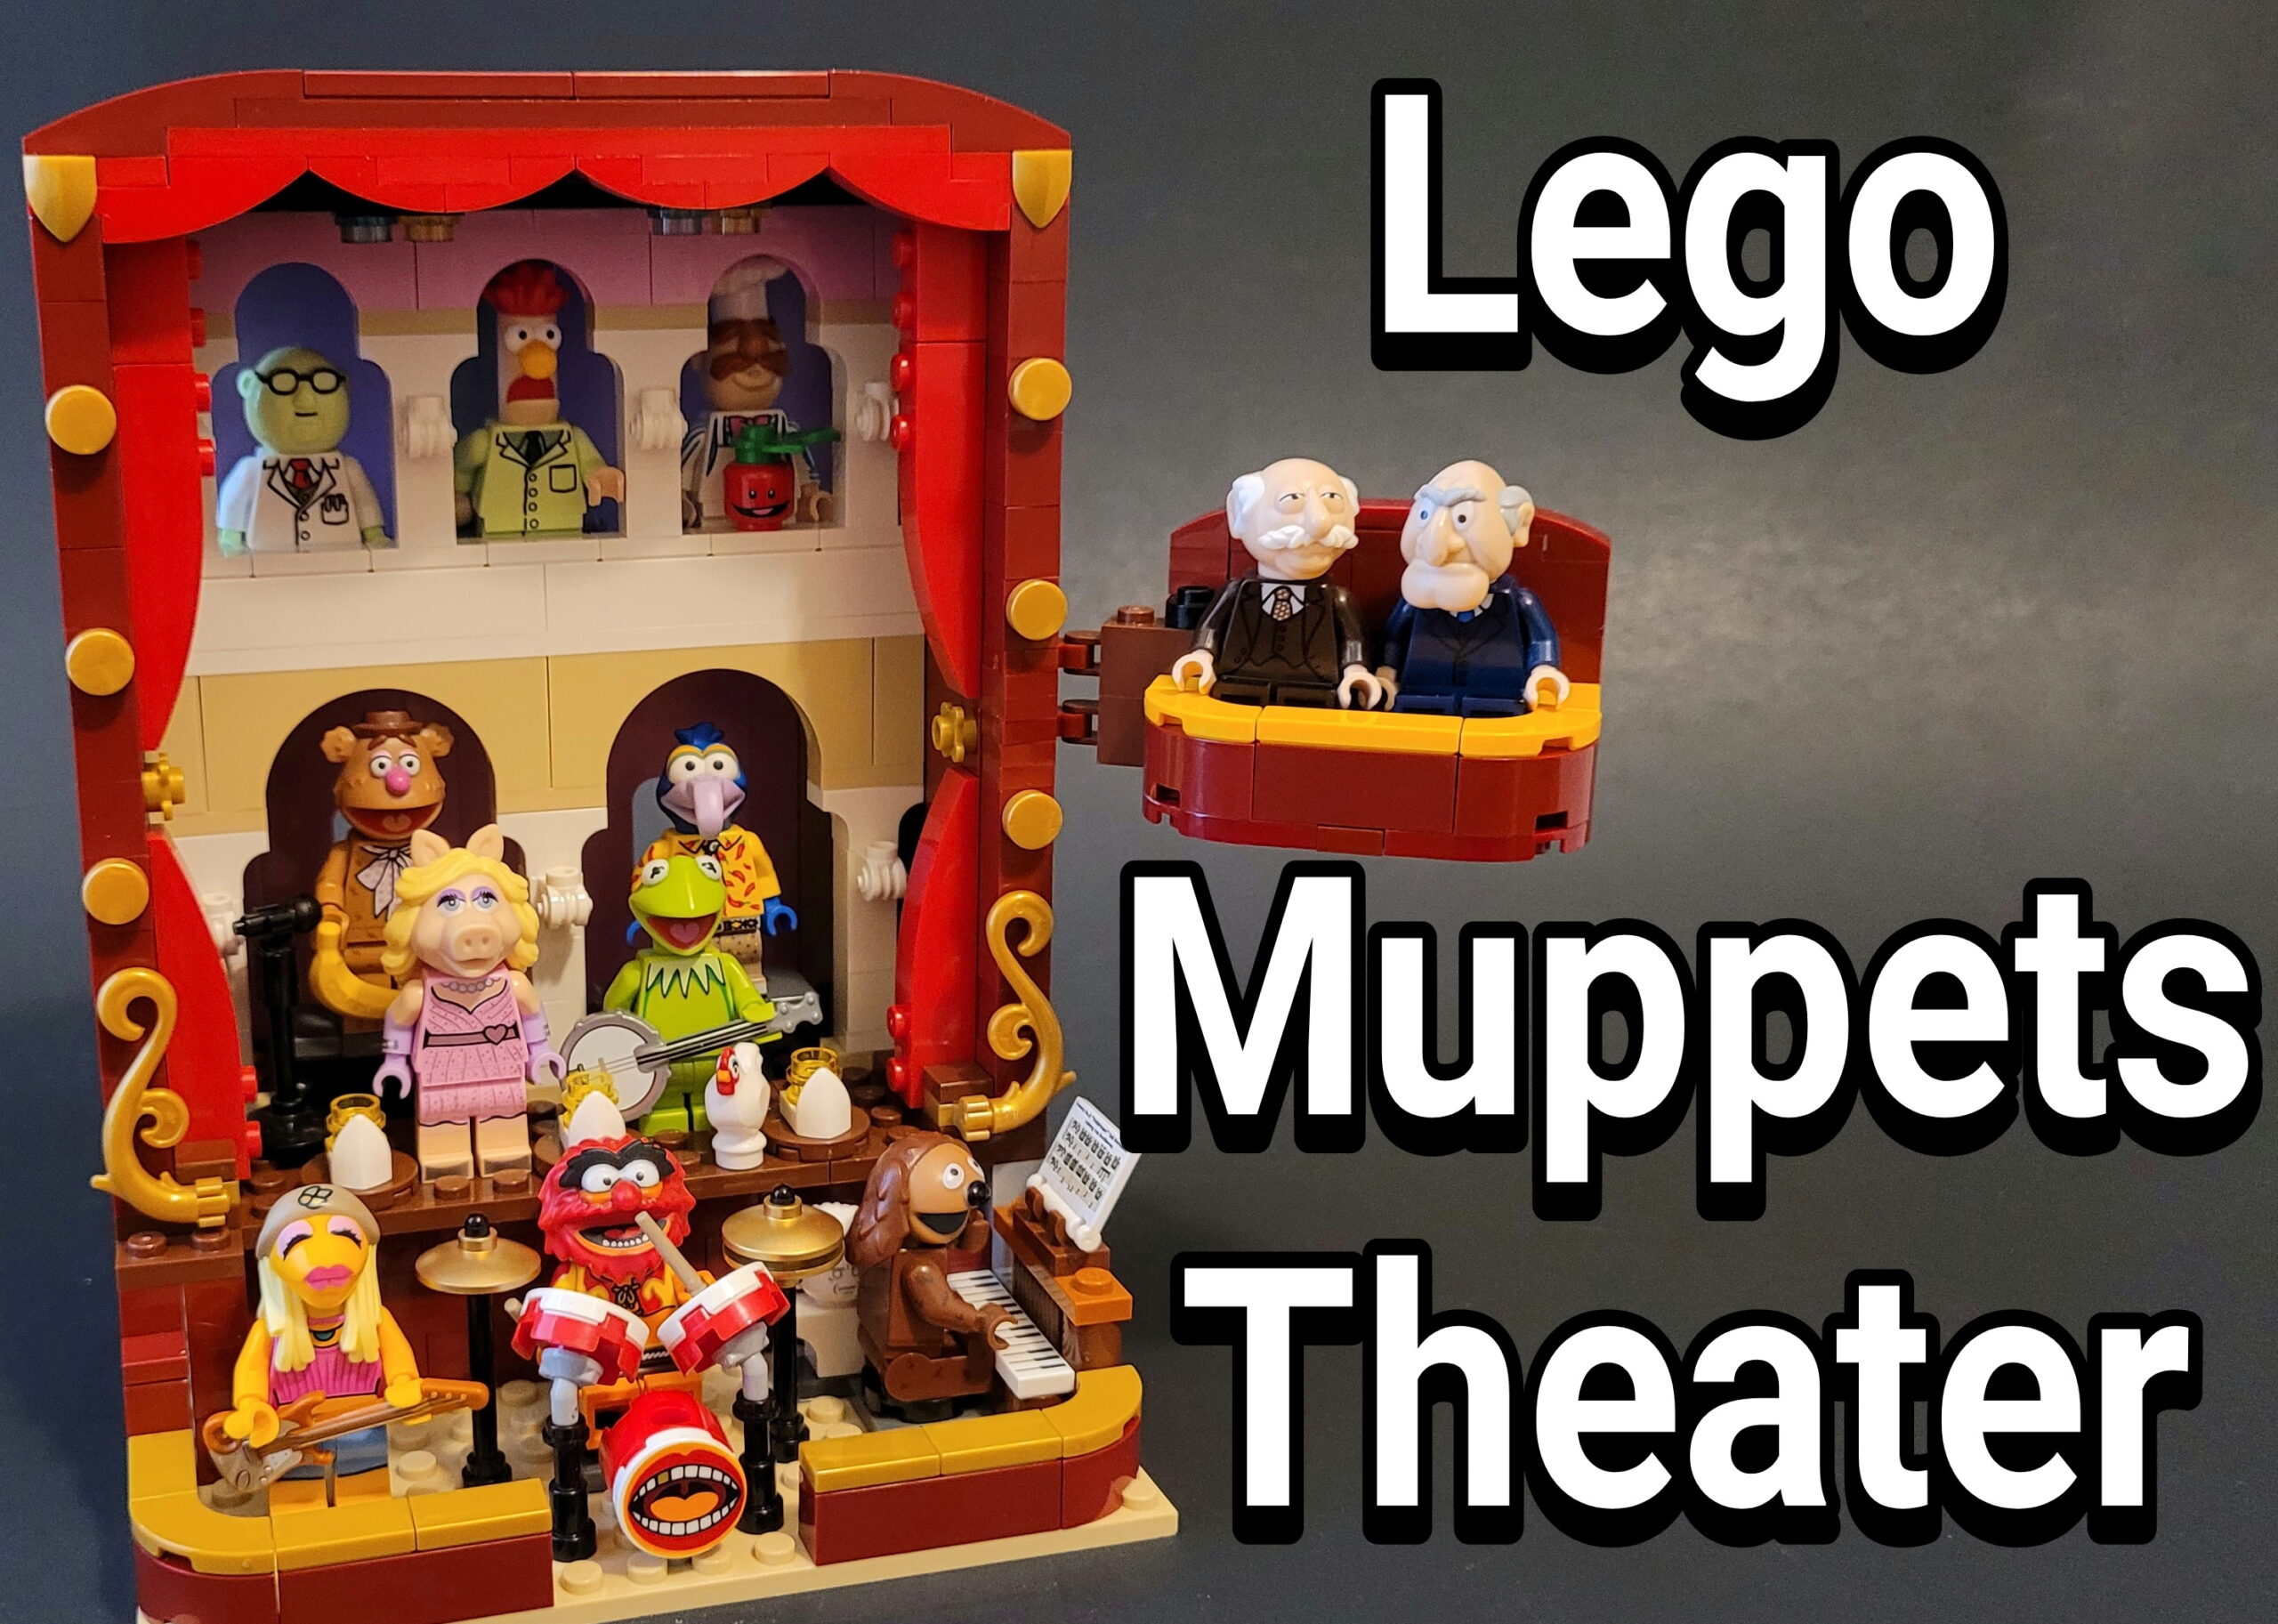 Make your own Lego Muppets Theater for limited space